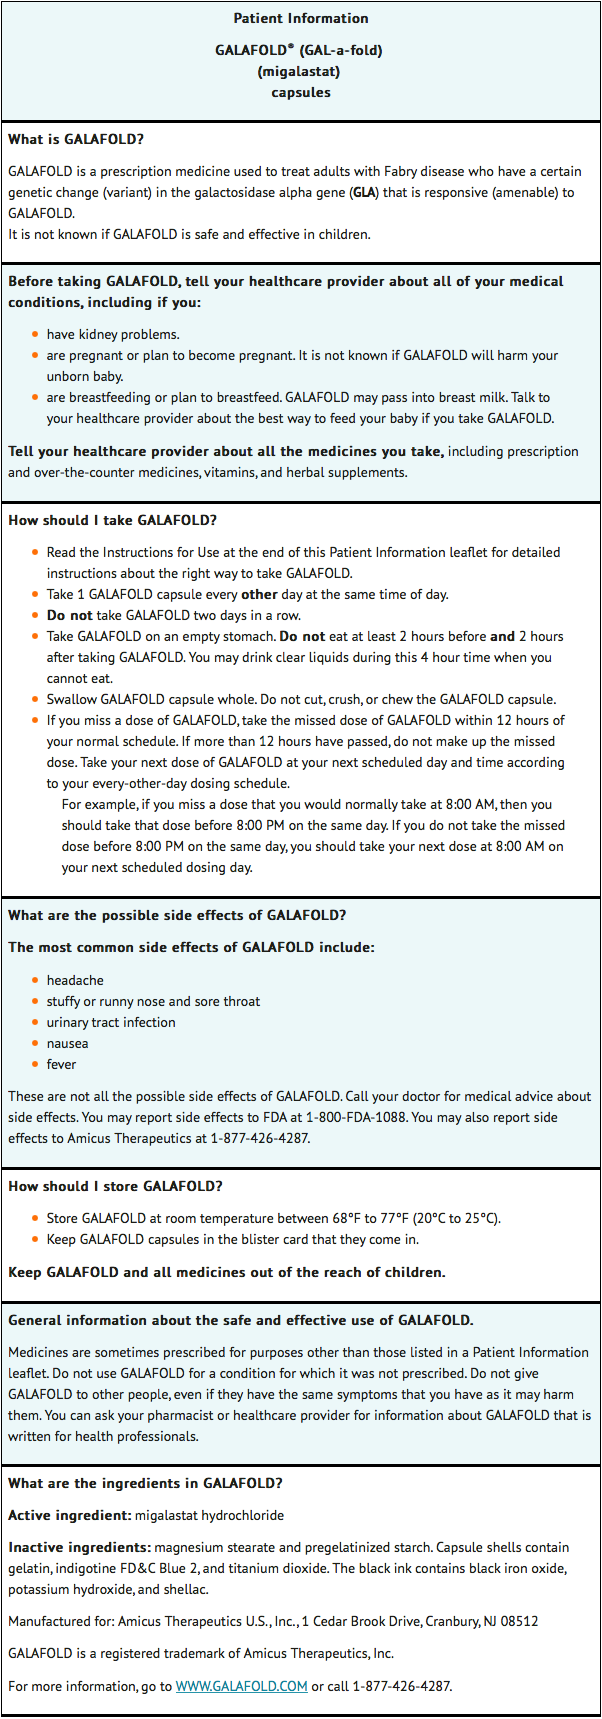 File:MigalastatMedGuide.png